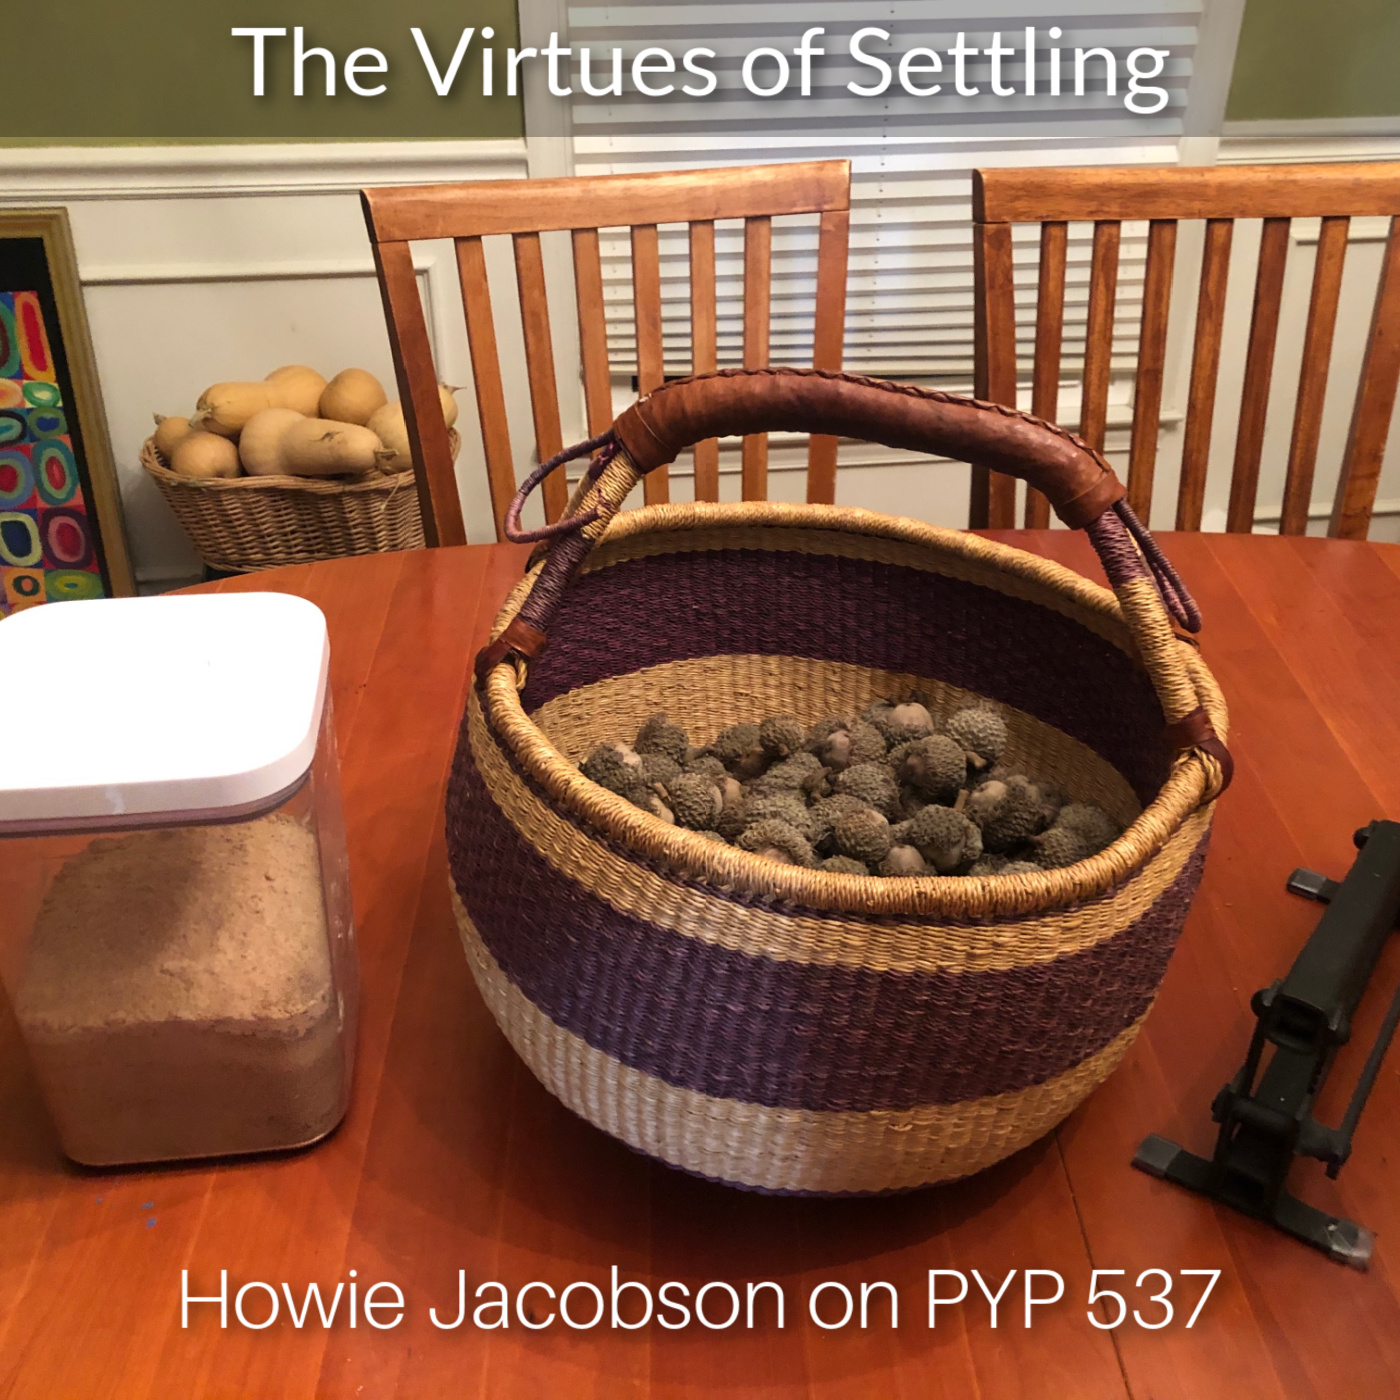 The Virtues of Settling: Howie Jacobson on PYP 537